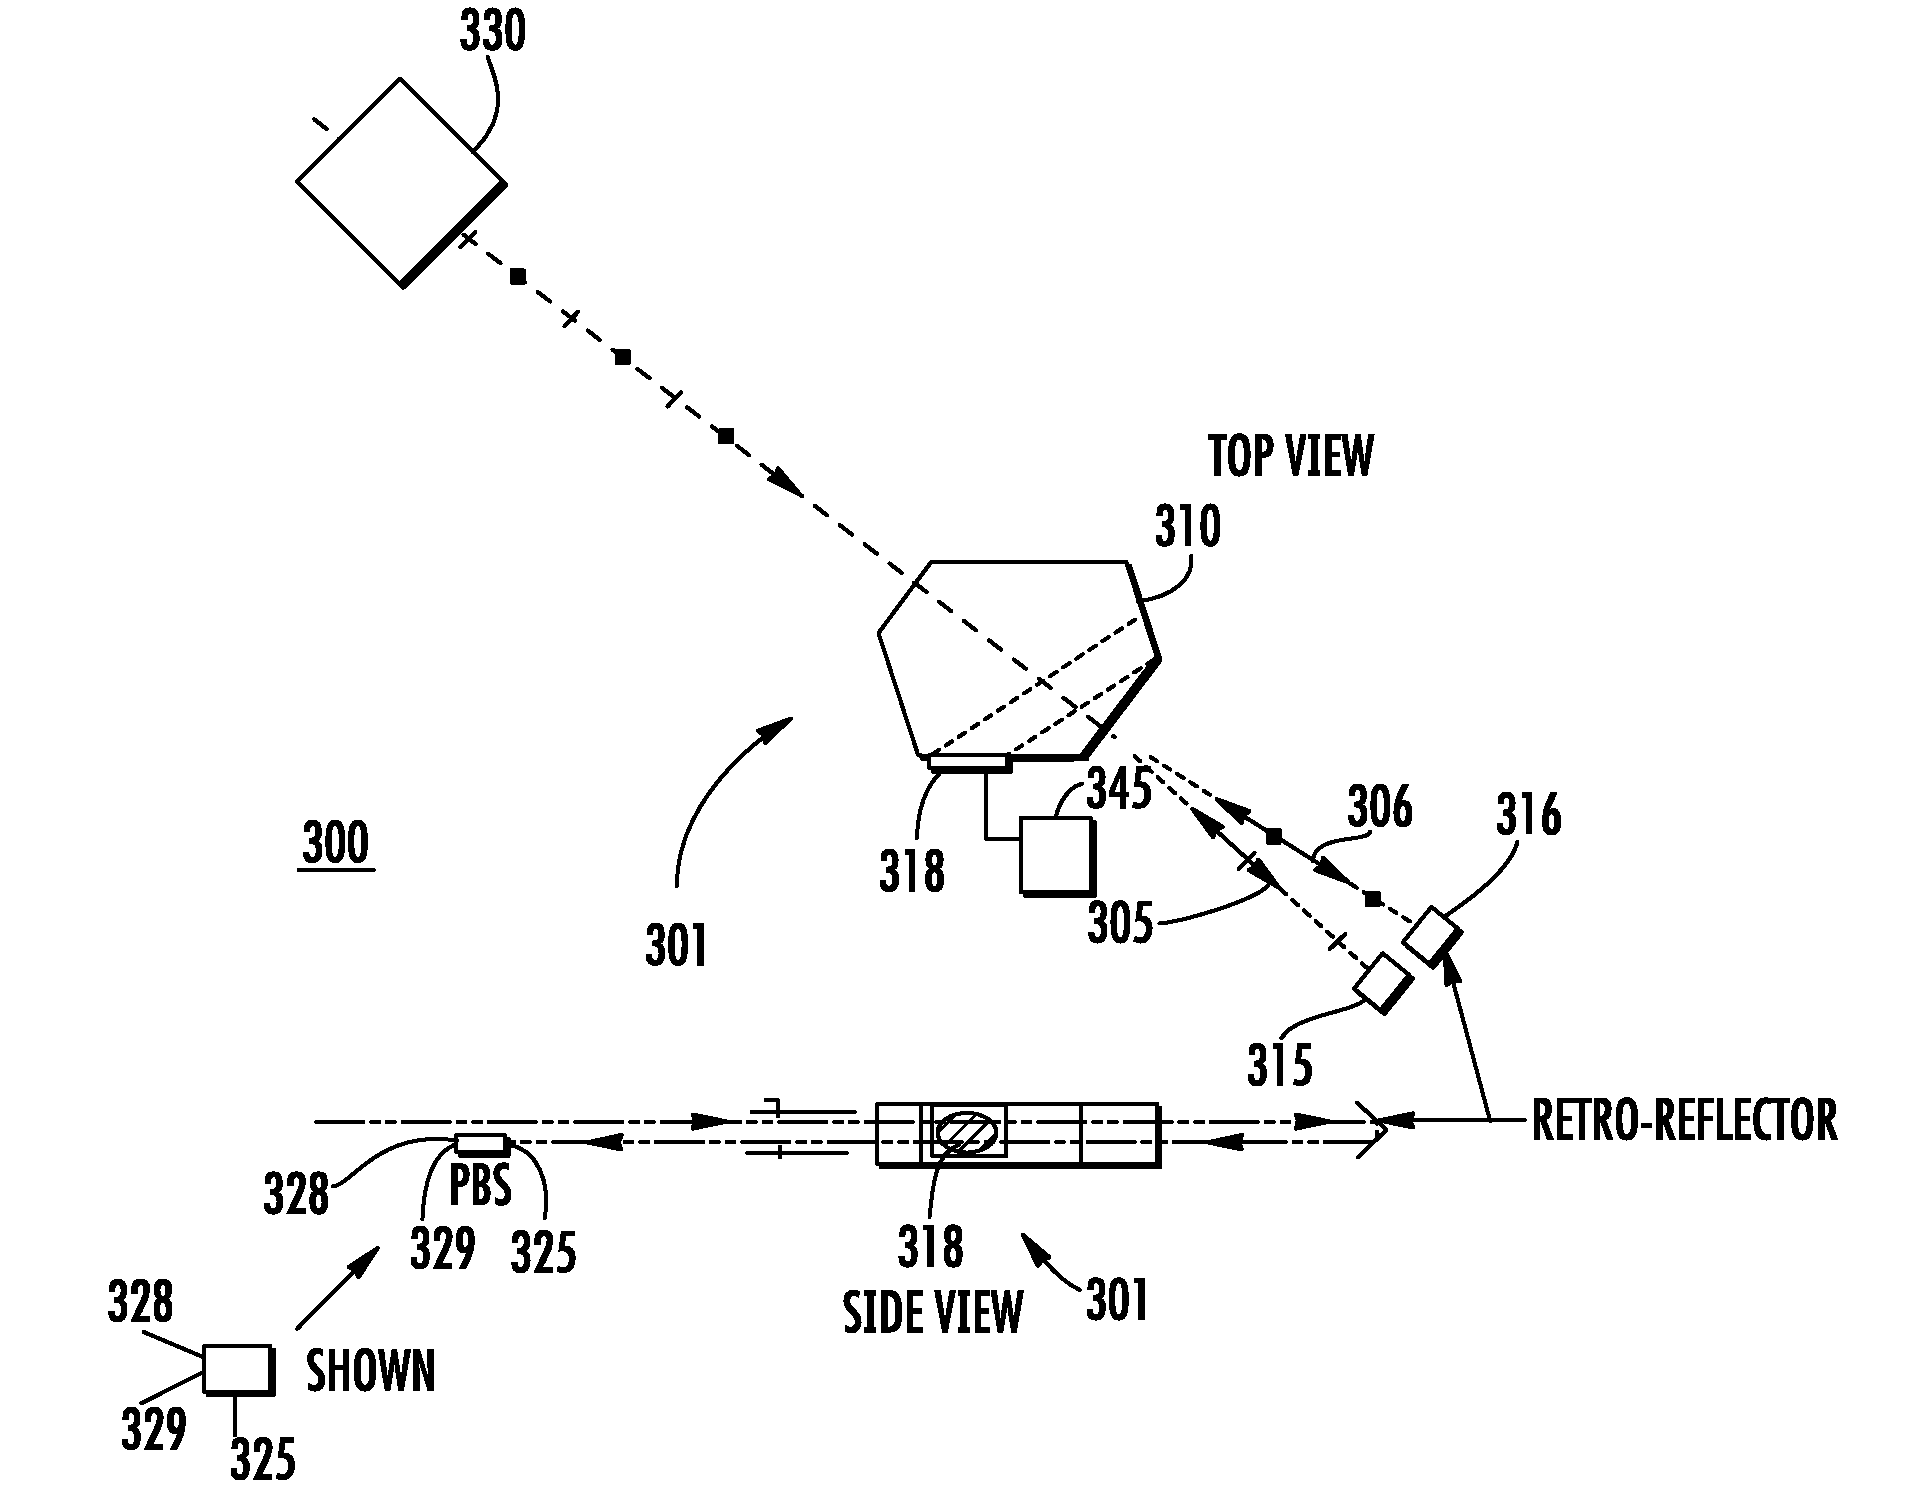 High frequency acousto-optic frequency shifter having wide acceptance angle